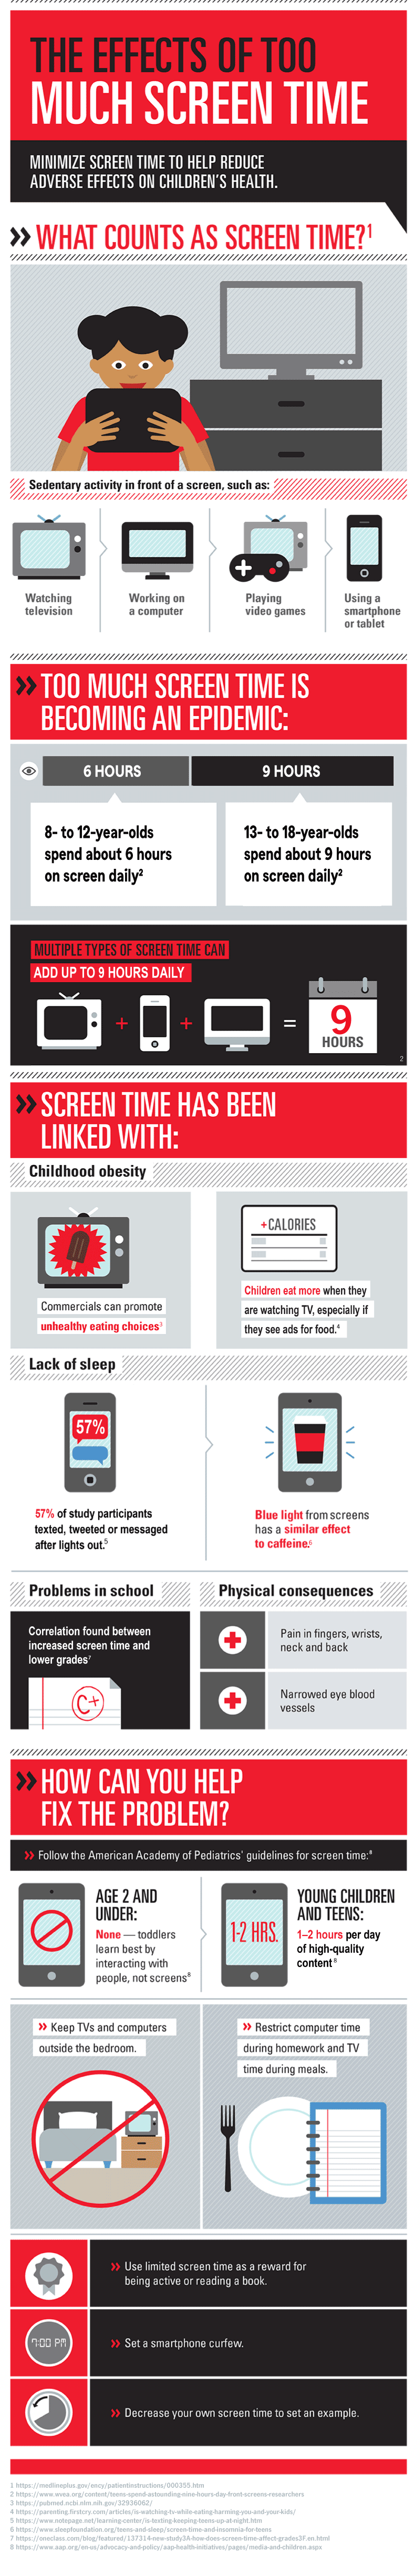 Why and how to limit kids' screen time